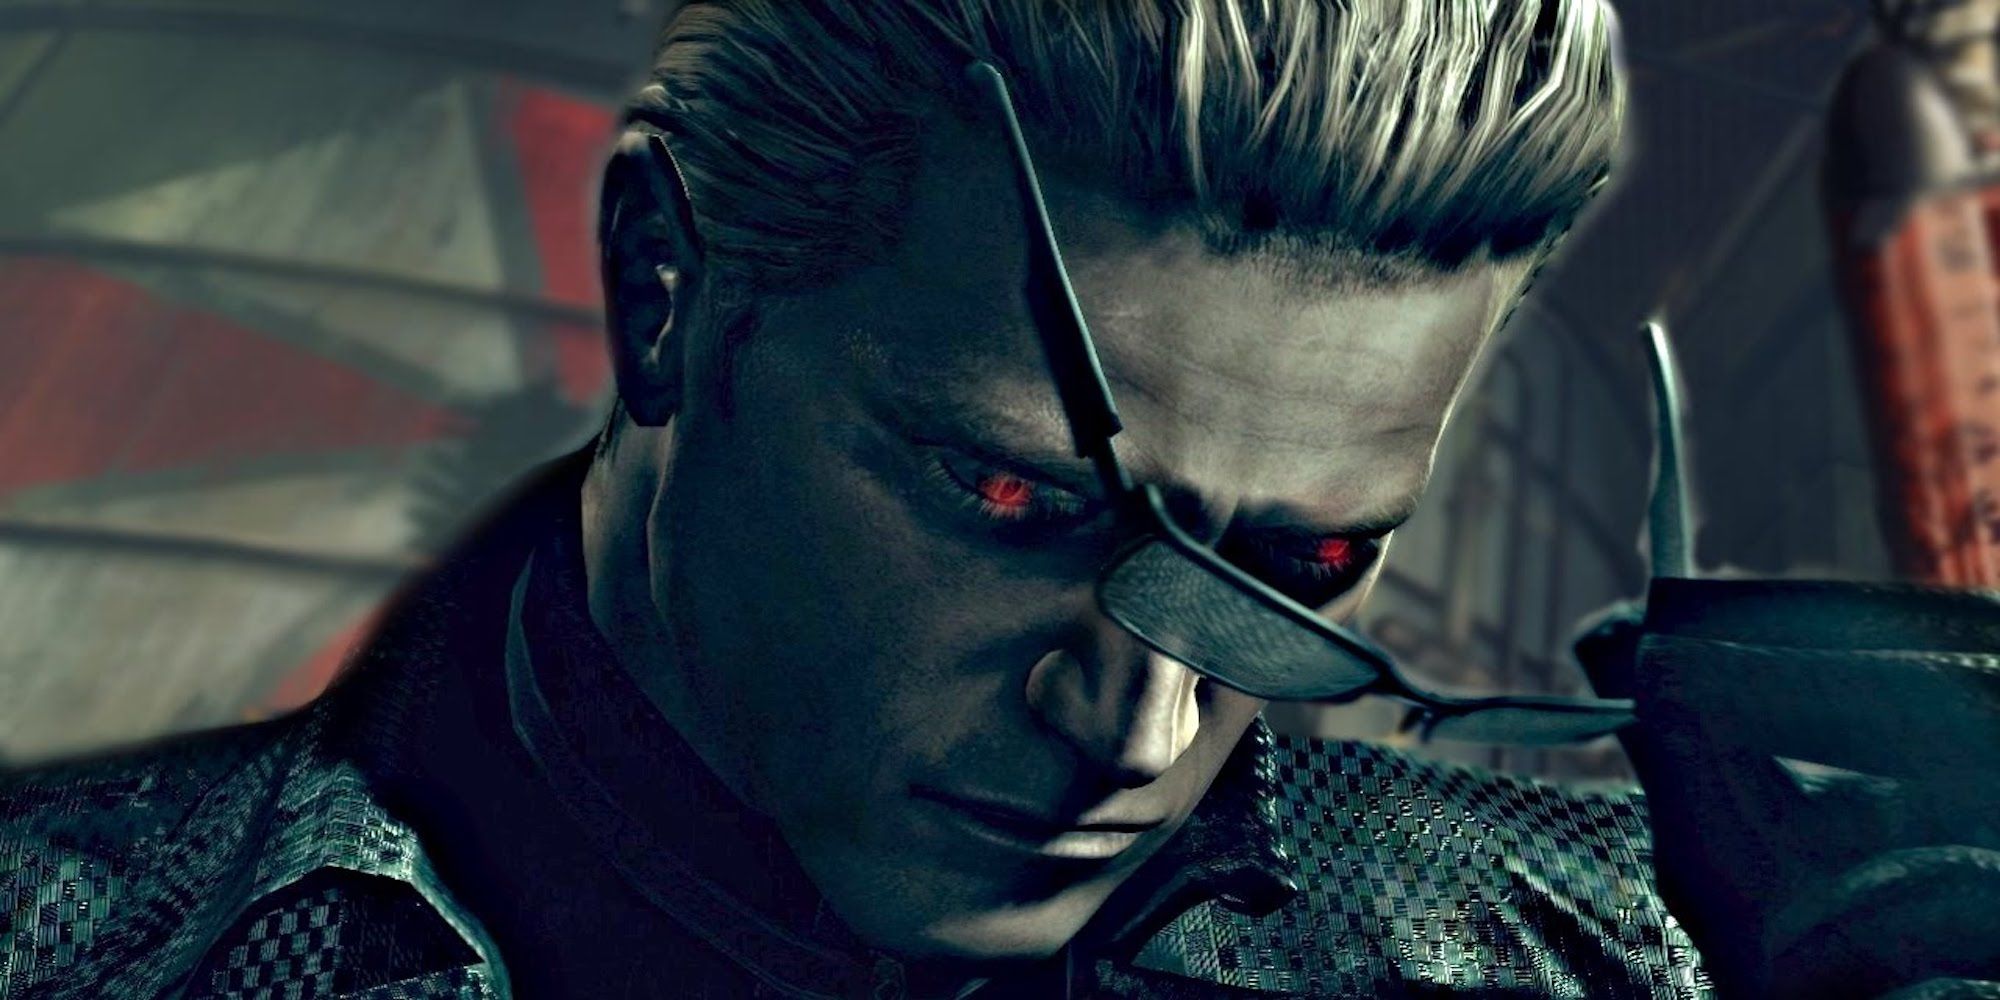 Albert Wesker with his sunglasses (Resident Evil series)